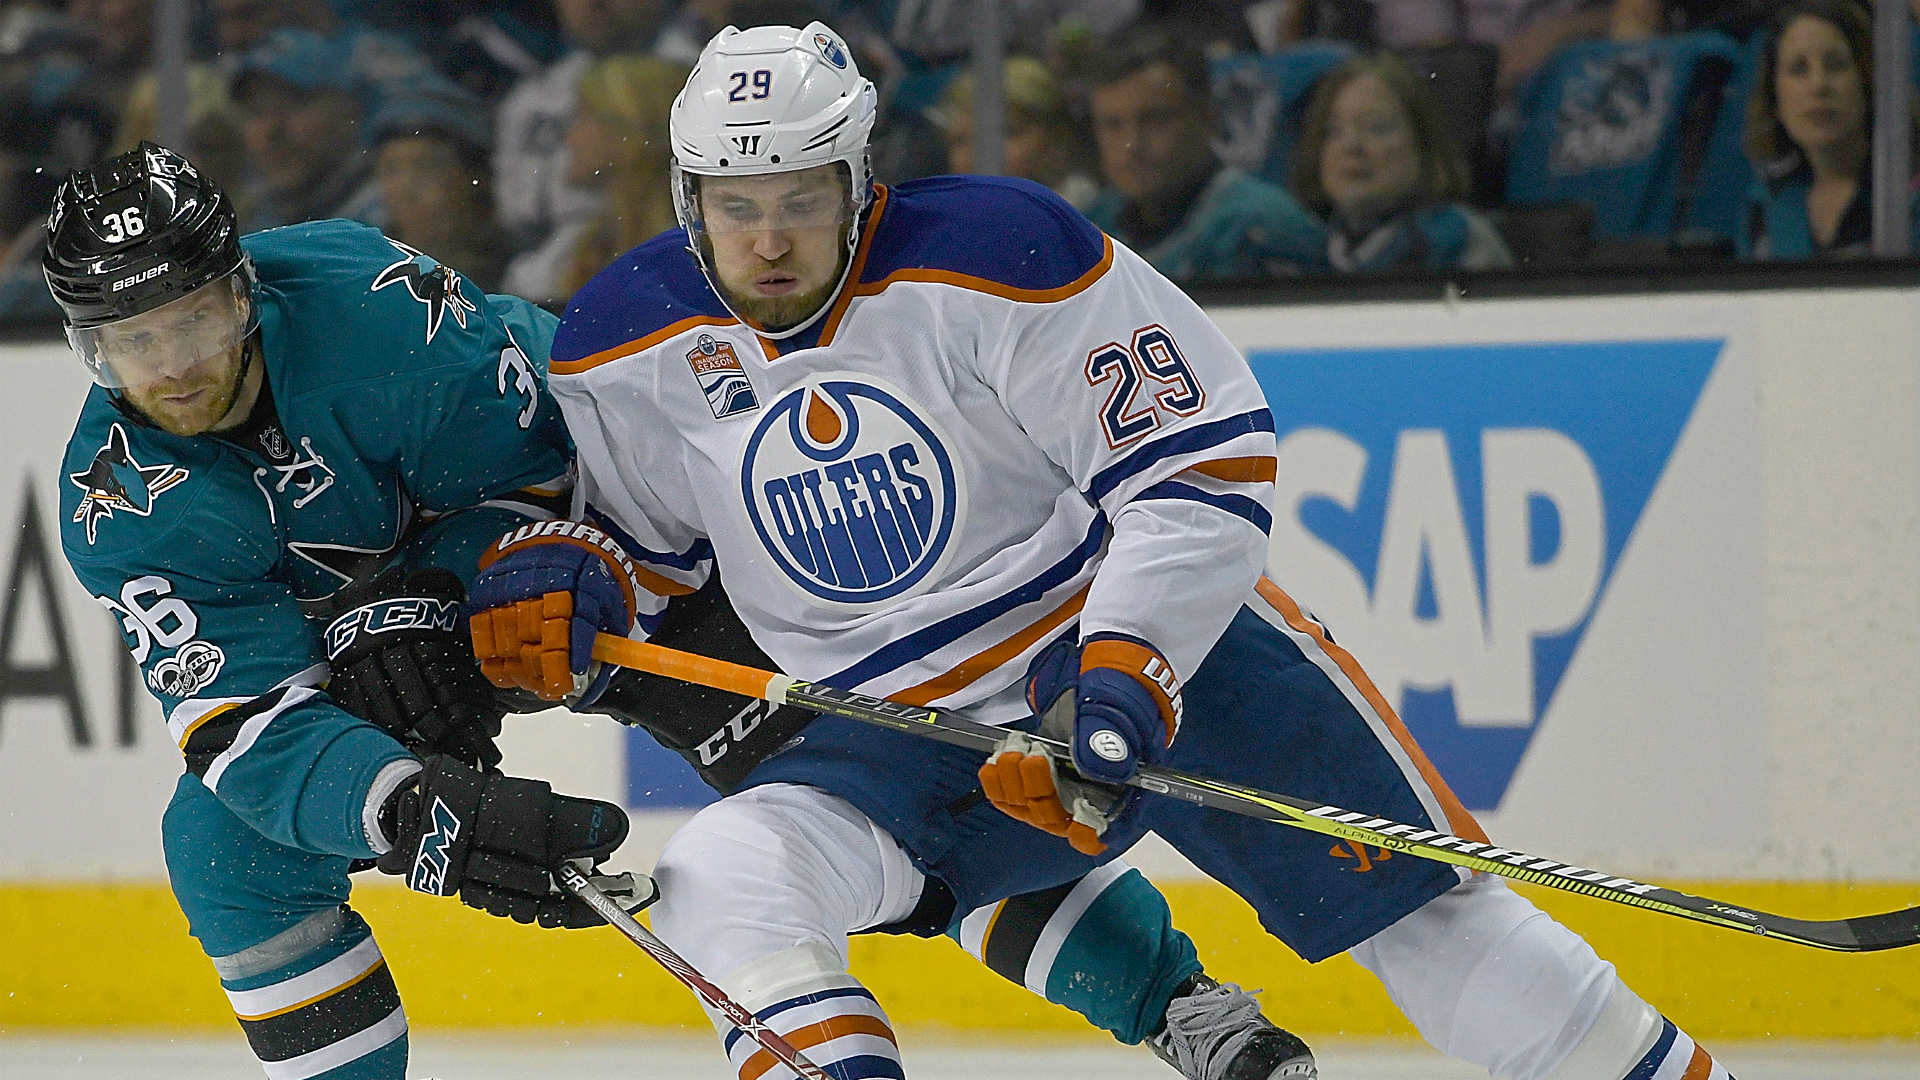 Oilers Lock Up C Leon Draisaitl With Eight Year, $68M Extension